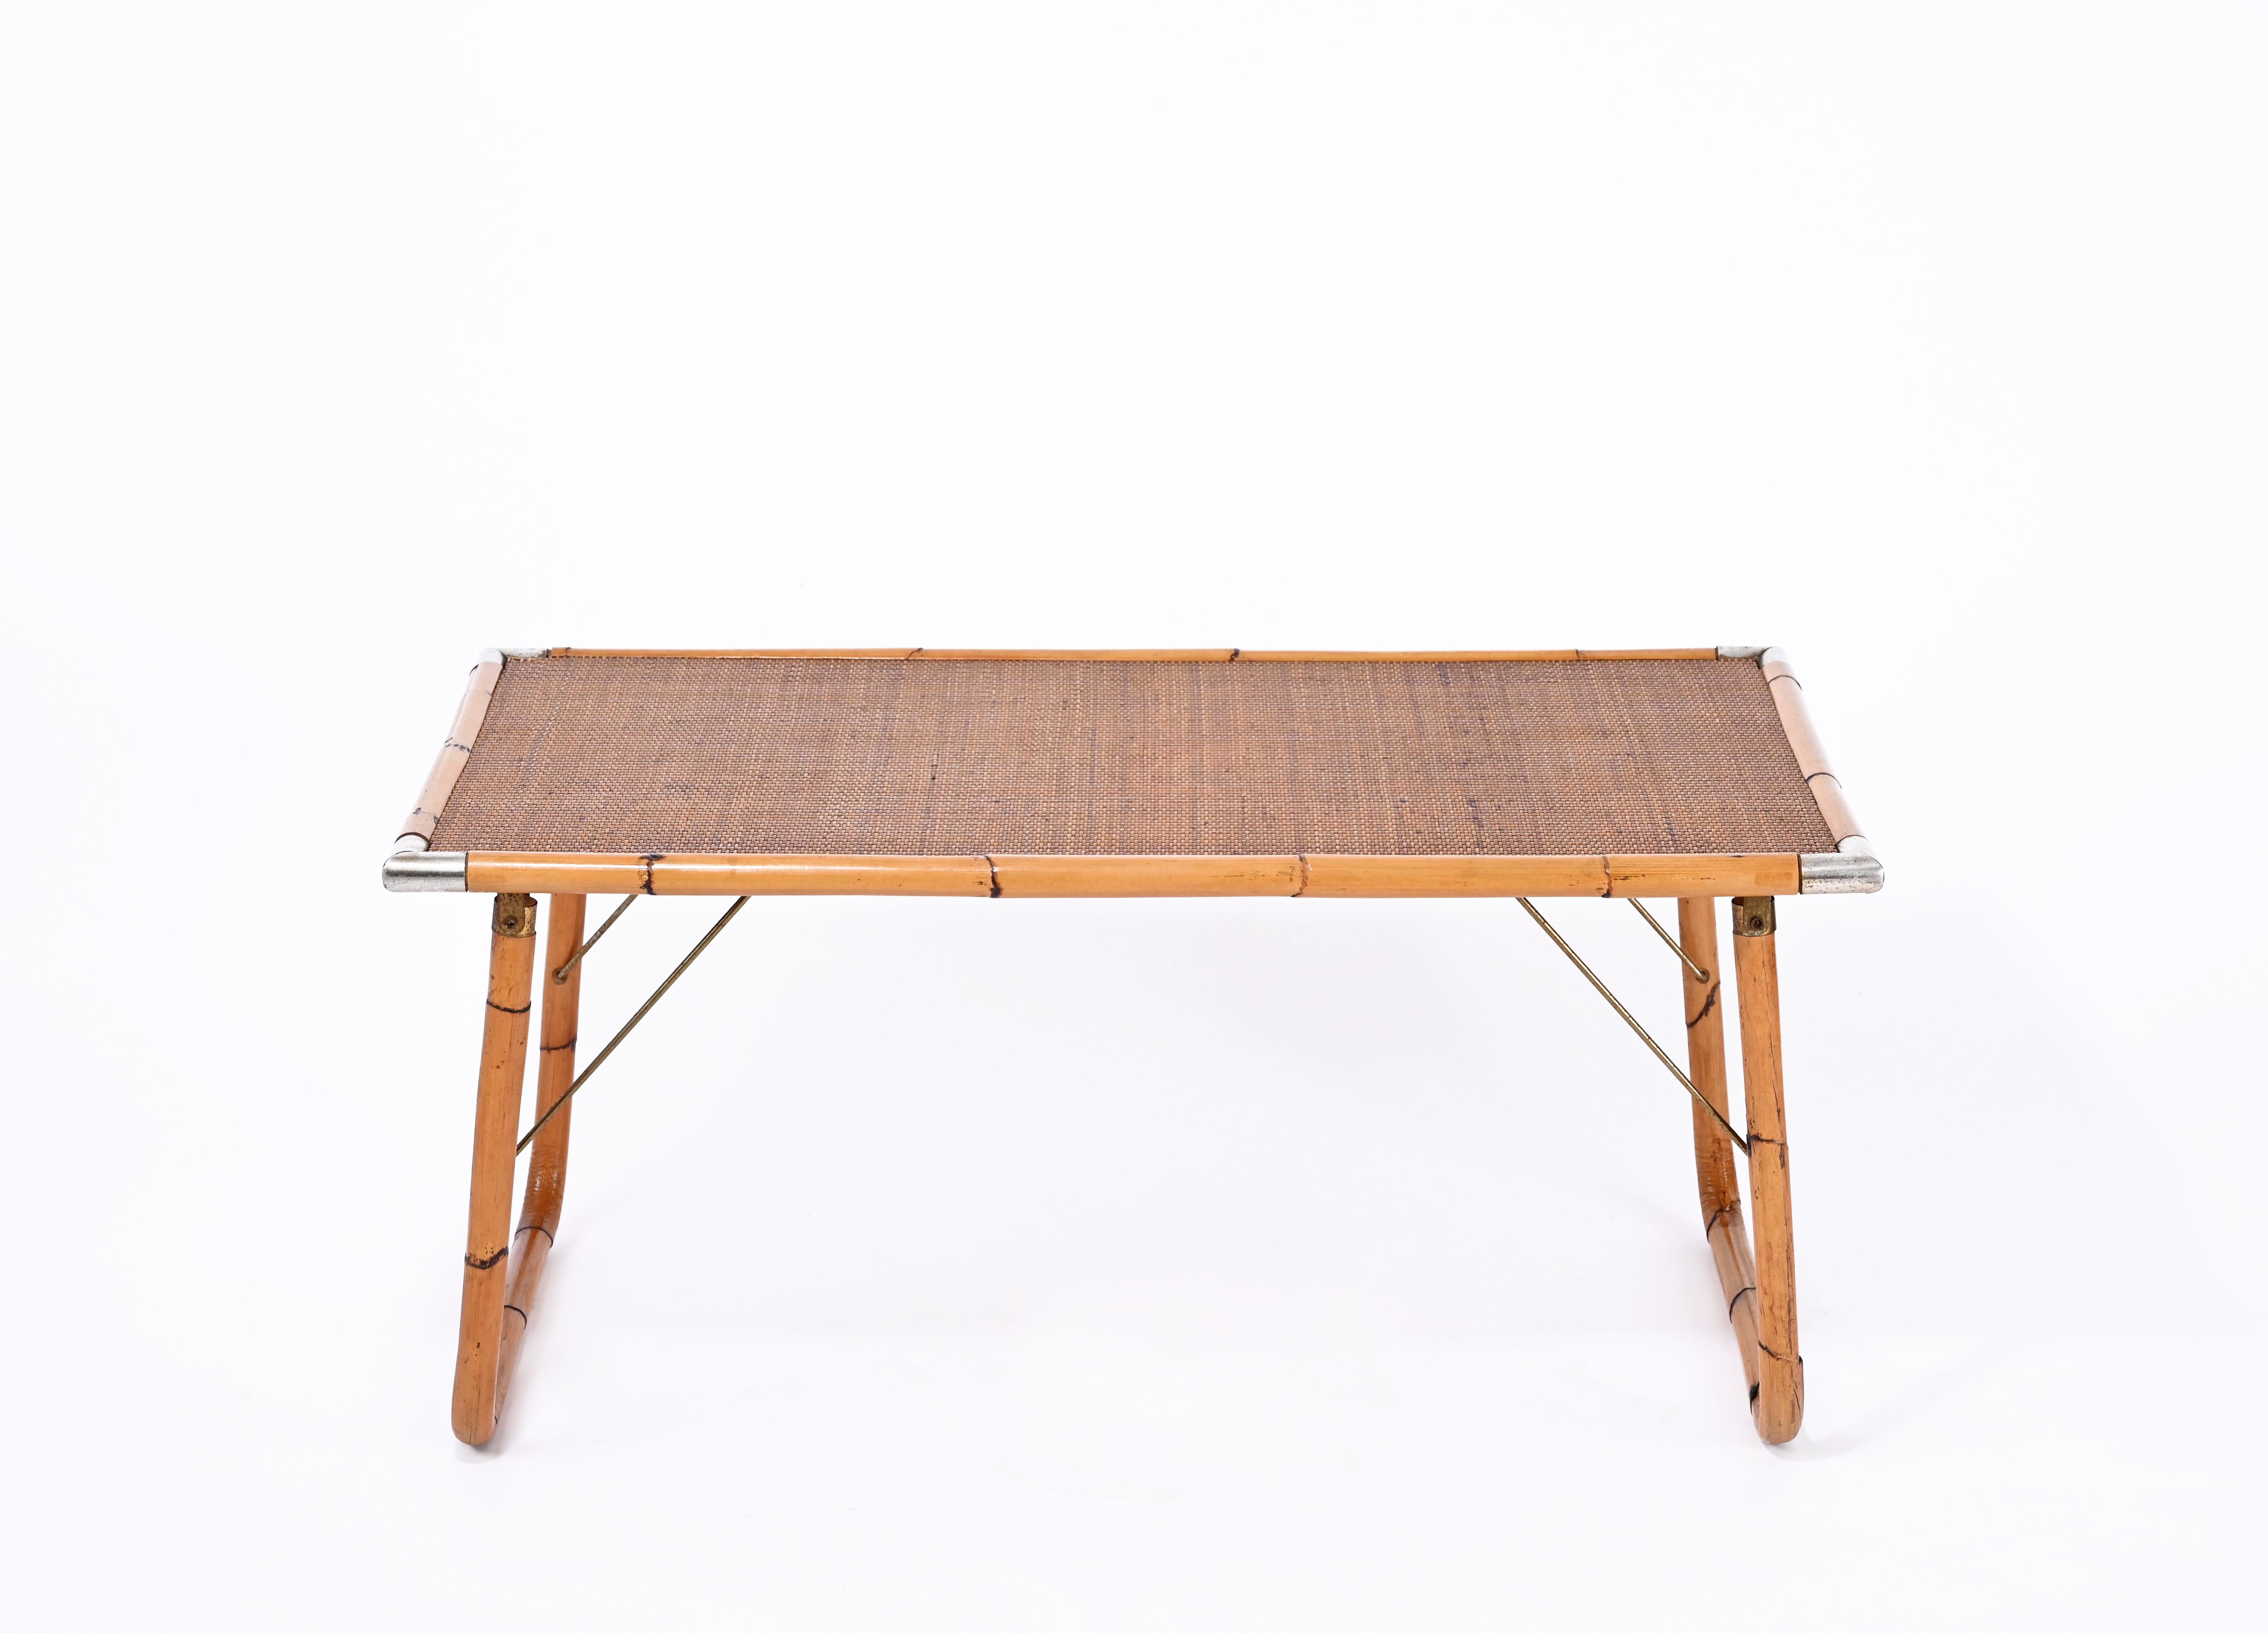 Italian Midcentury Folding Coffee Table in Bamboo, Wicker and Metal, Italy 1960s